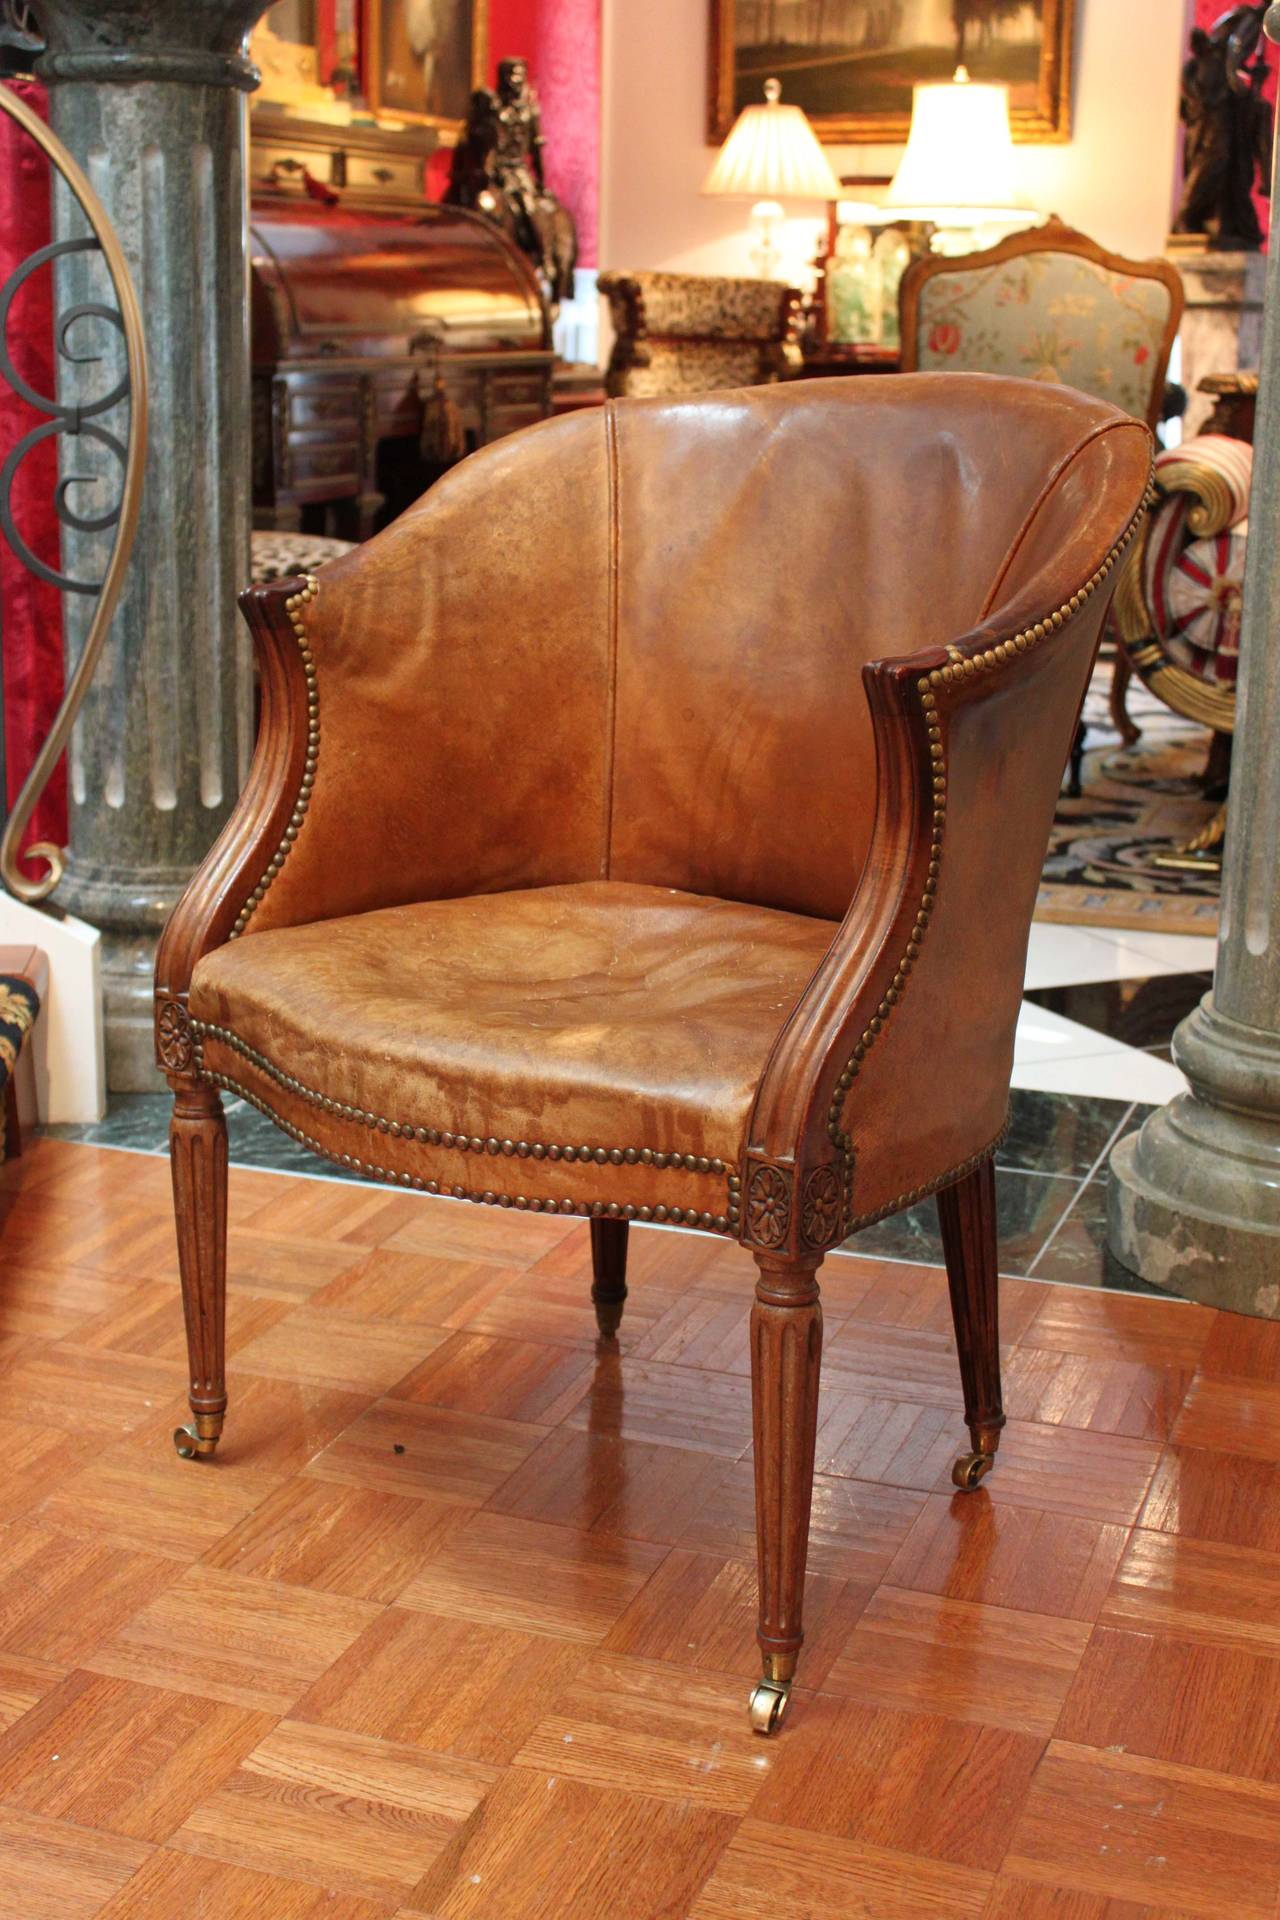 Carved mahogany desk chair in the Sheraton style, circa late 18th century. This chair retains it's original BADA seal and what may be it's original leather upholstery. Decorative rosette and fluted legs on brass castors.